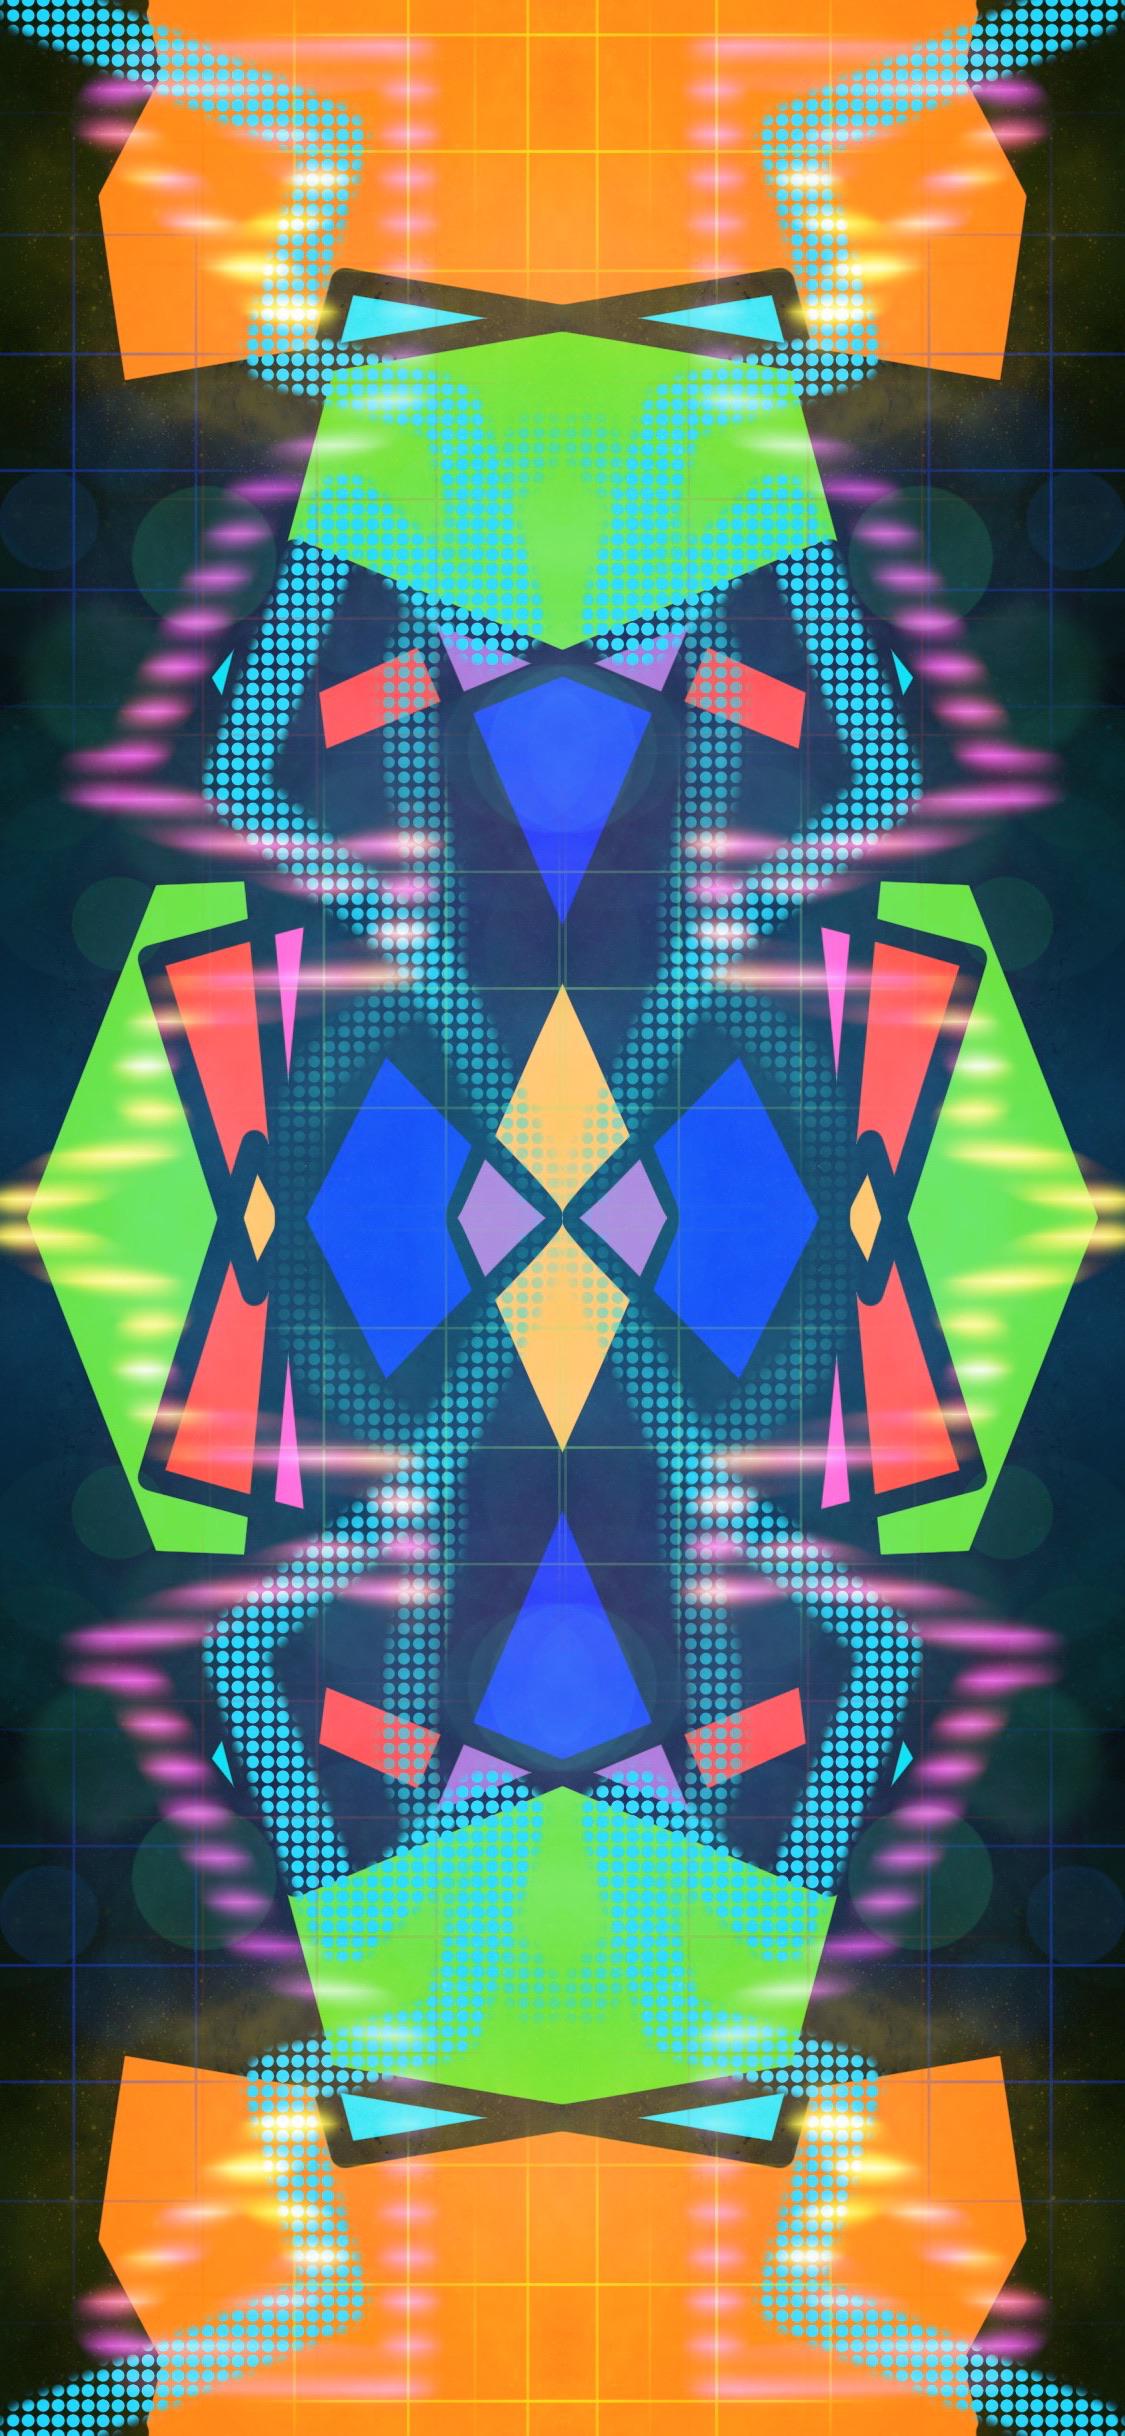 Been having fun making these kinda trippy wallpapers. This is made